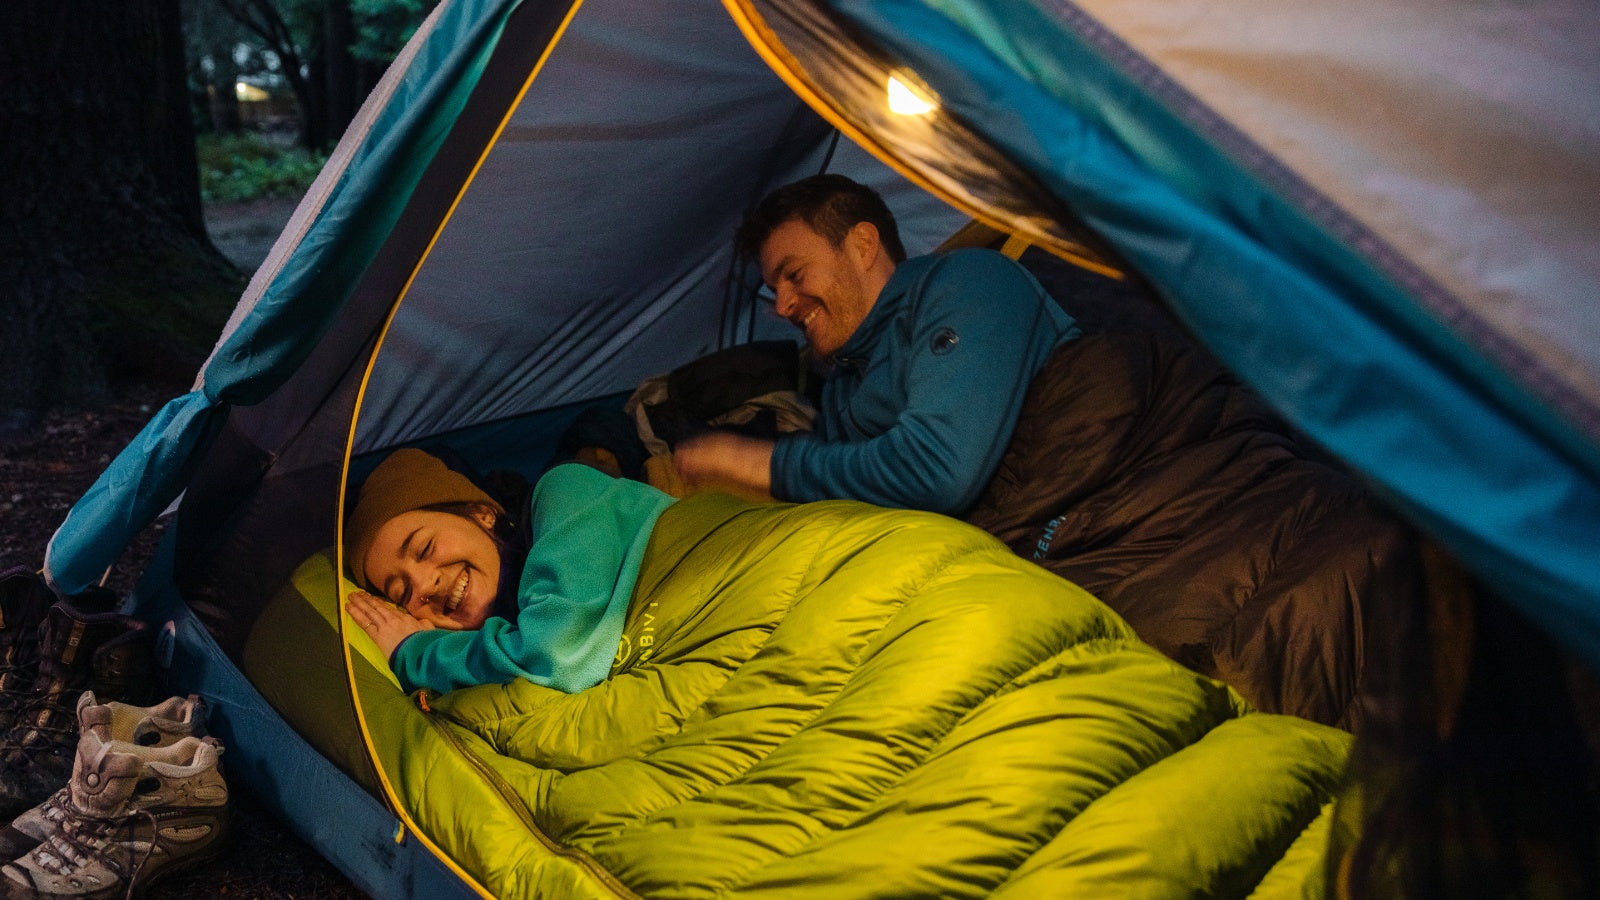 Camping couple tucked into their Zenbivy Bed sleeping bags inside their tent